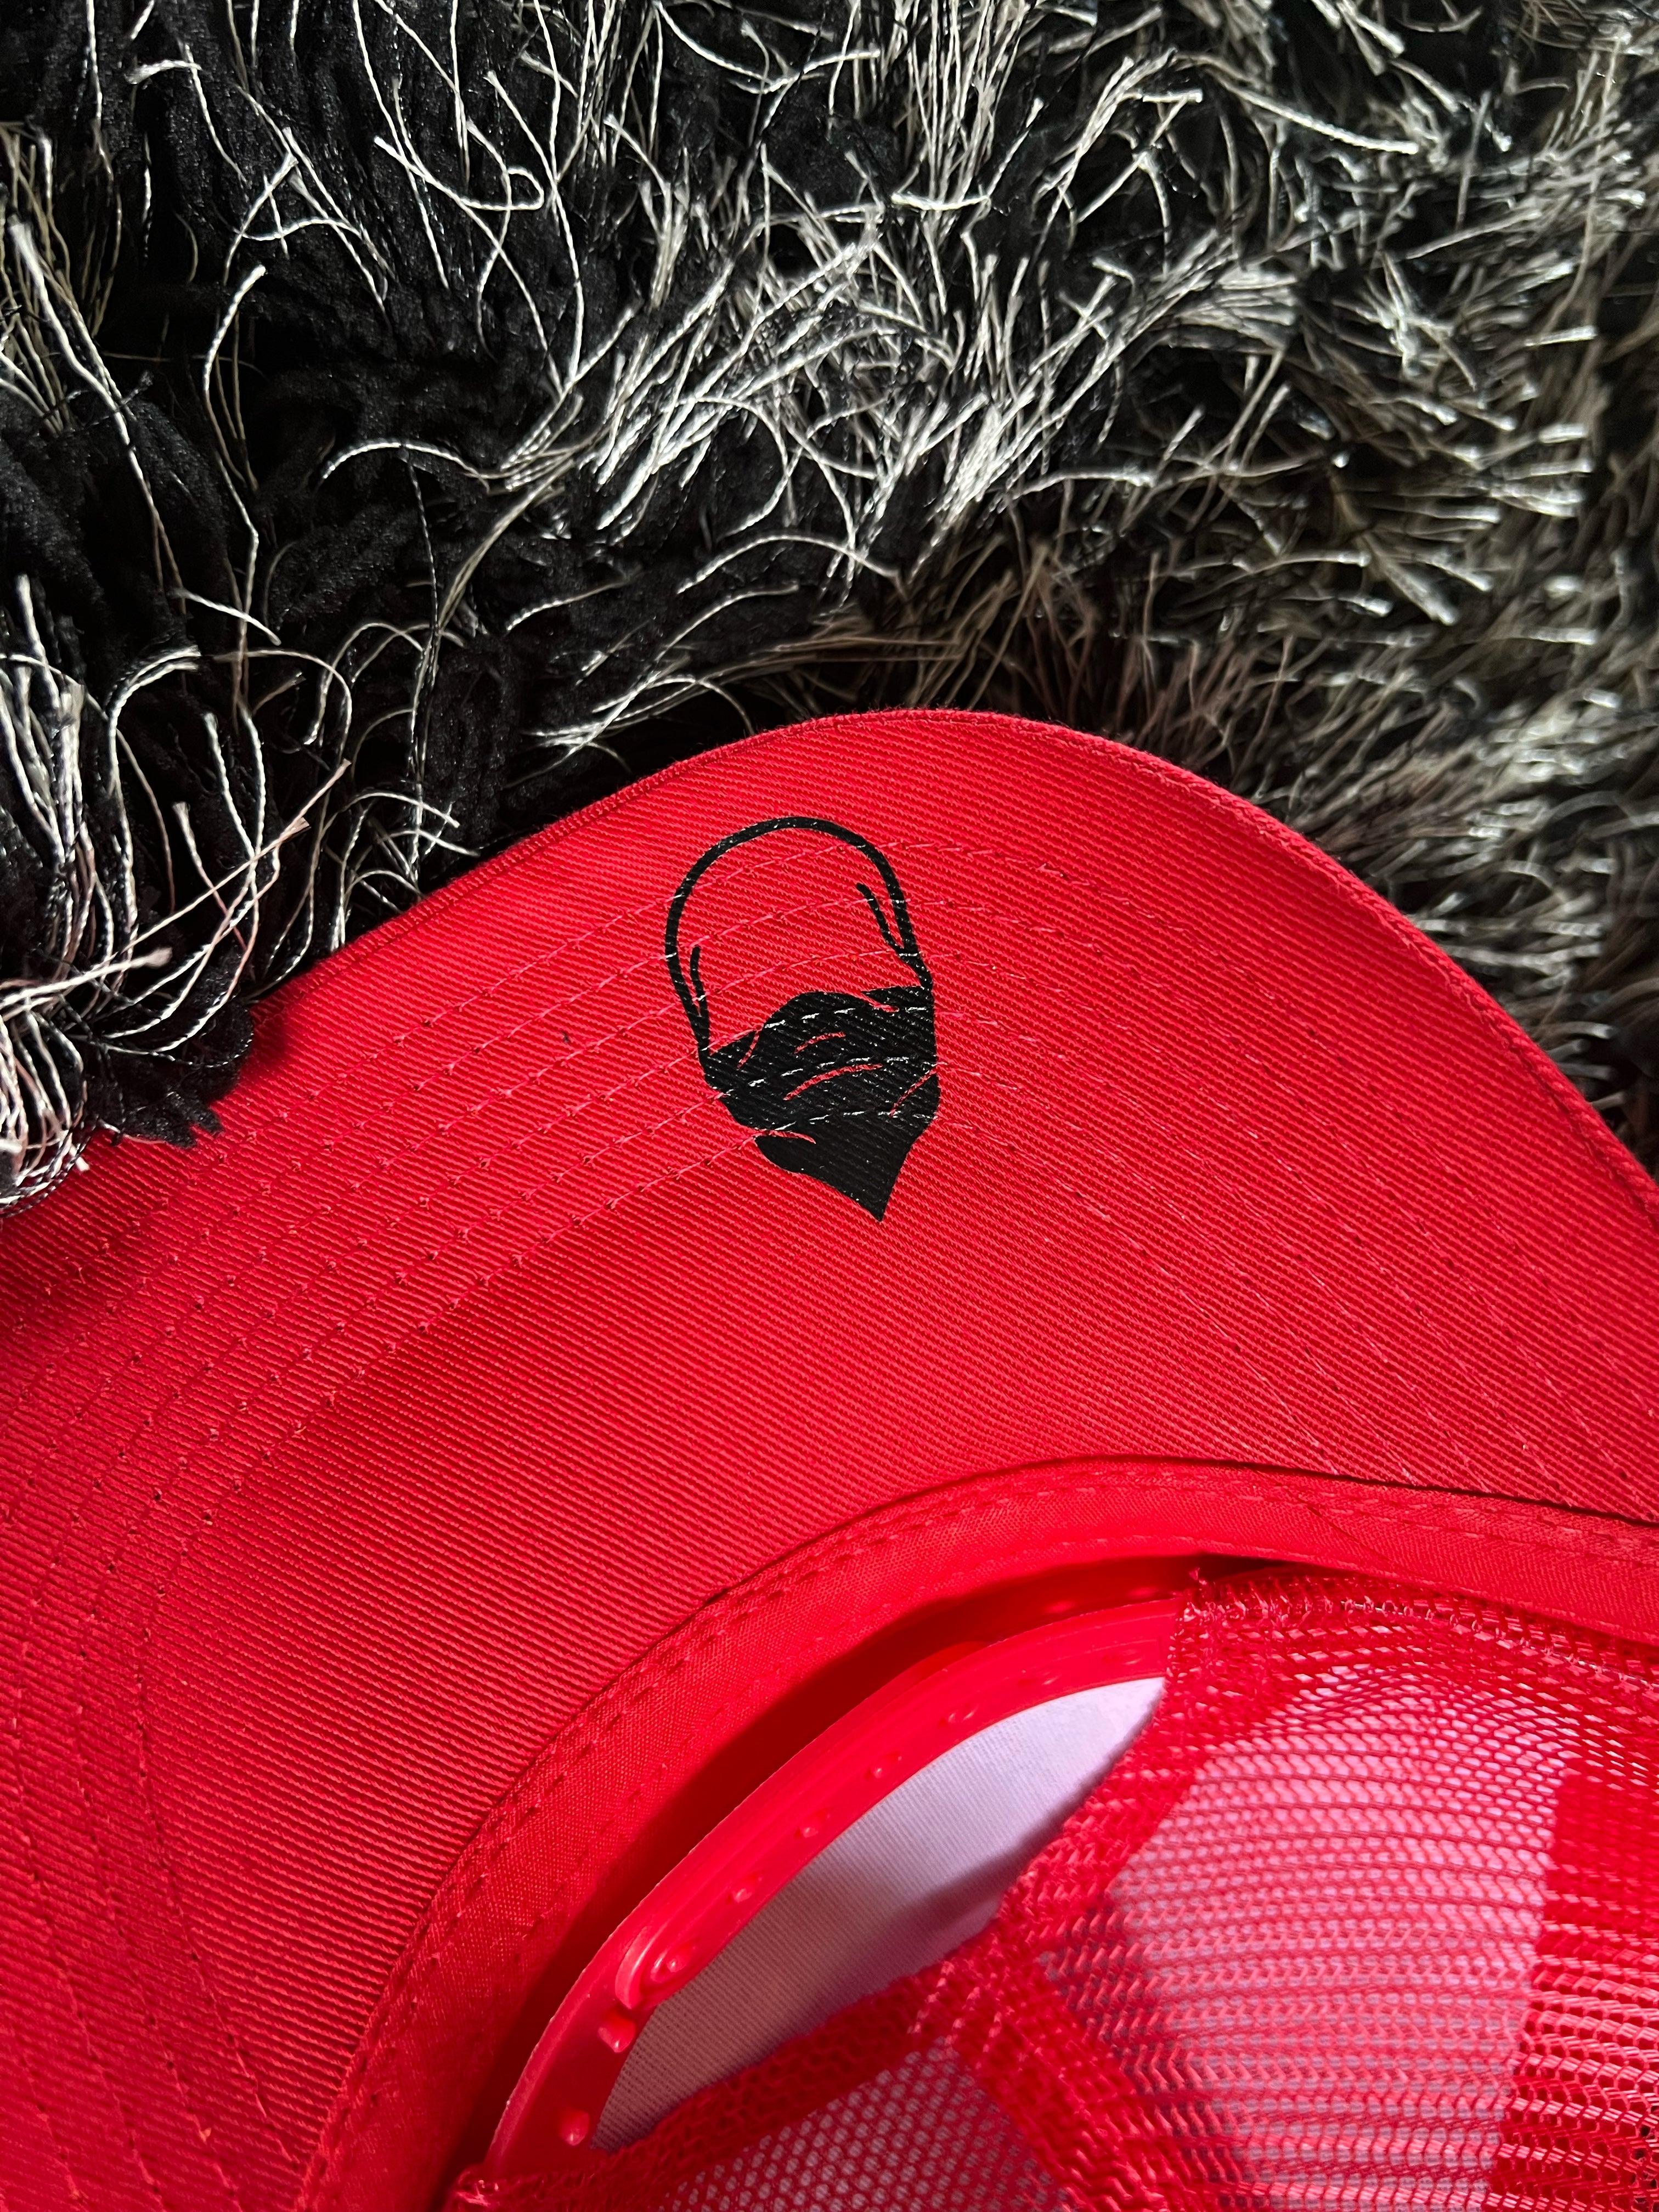 TROUBLE MAKER CURVED BILL RED HAT - The Drive Clothing